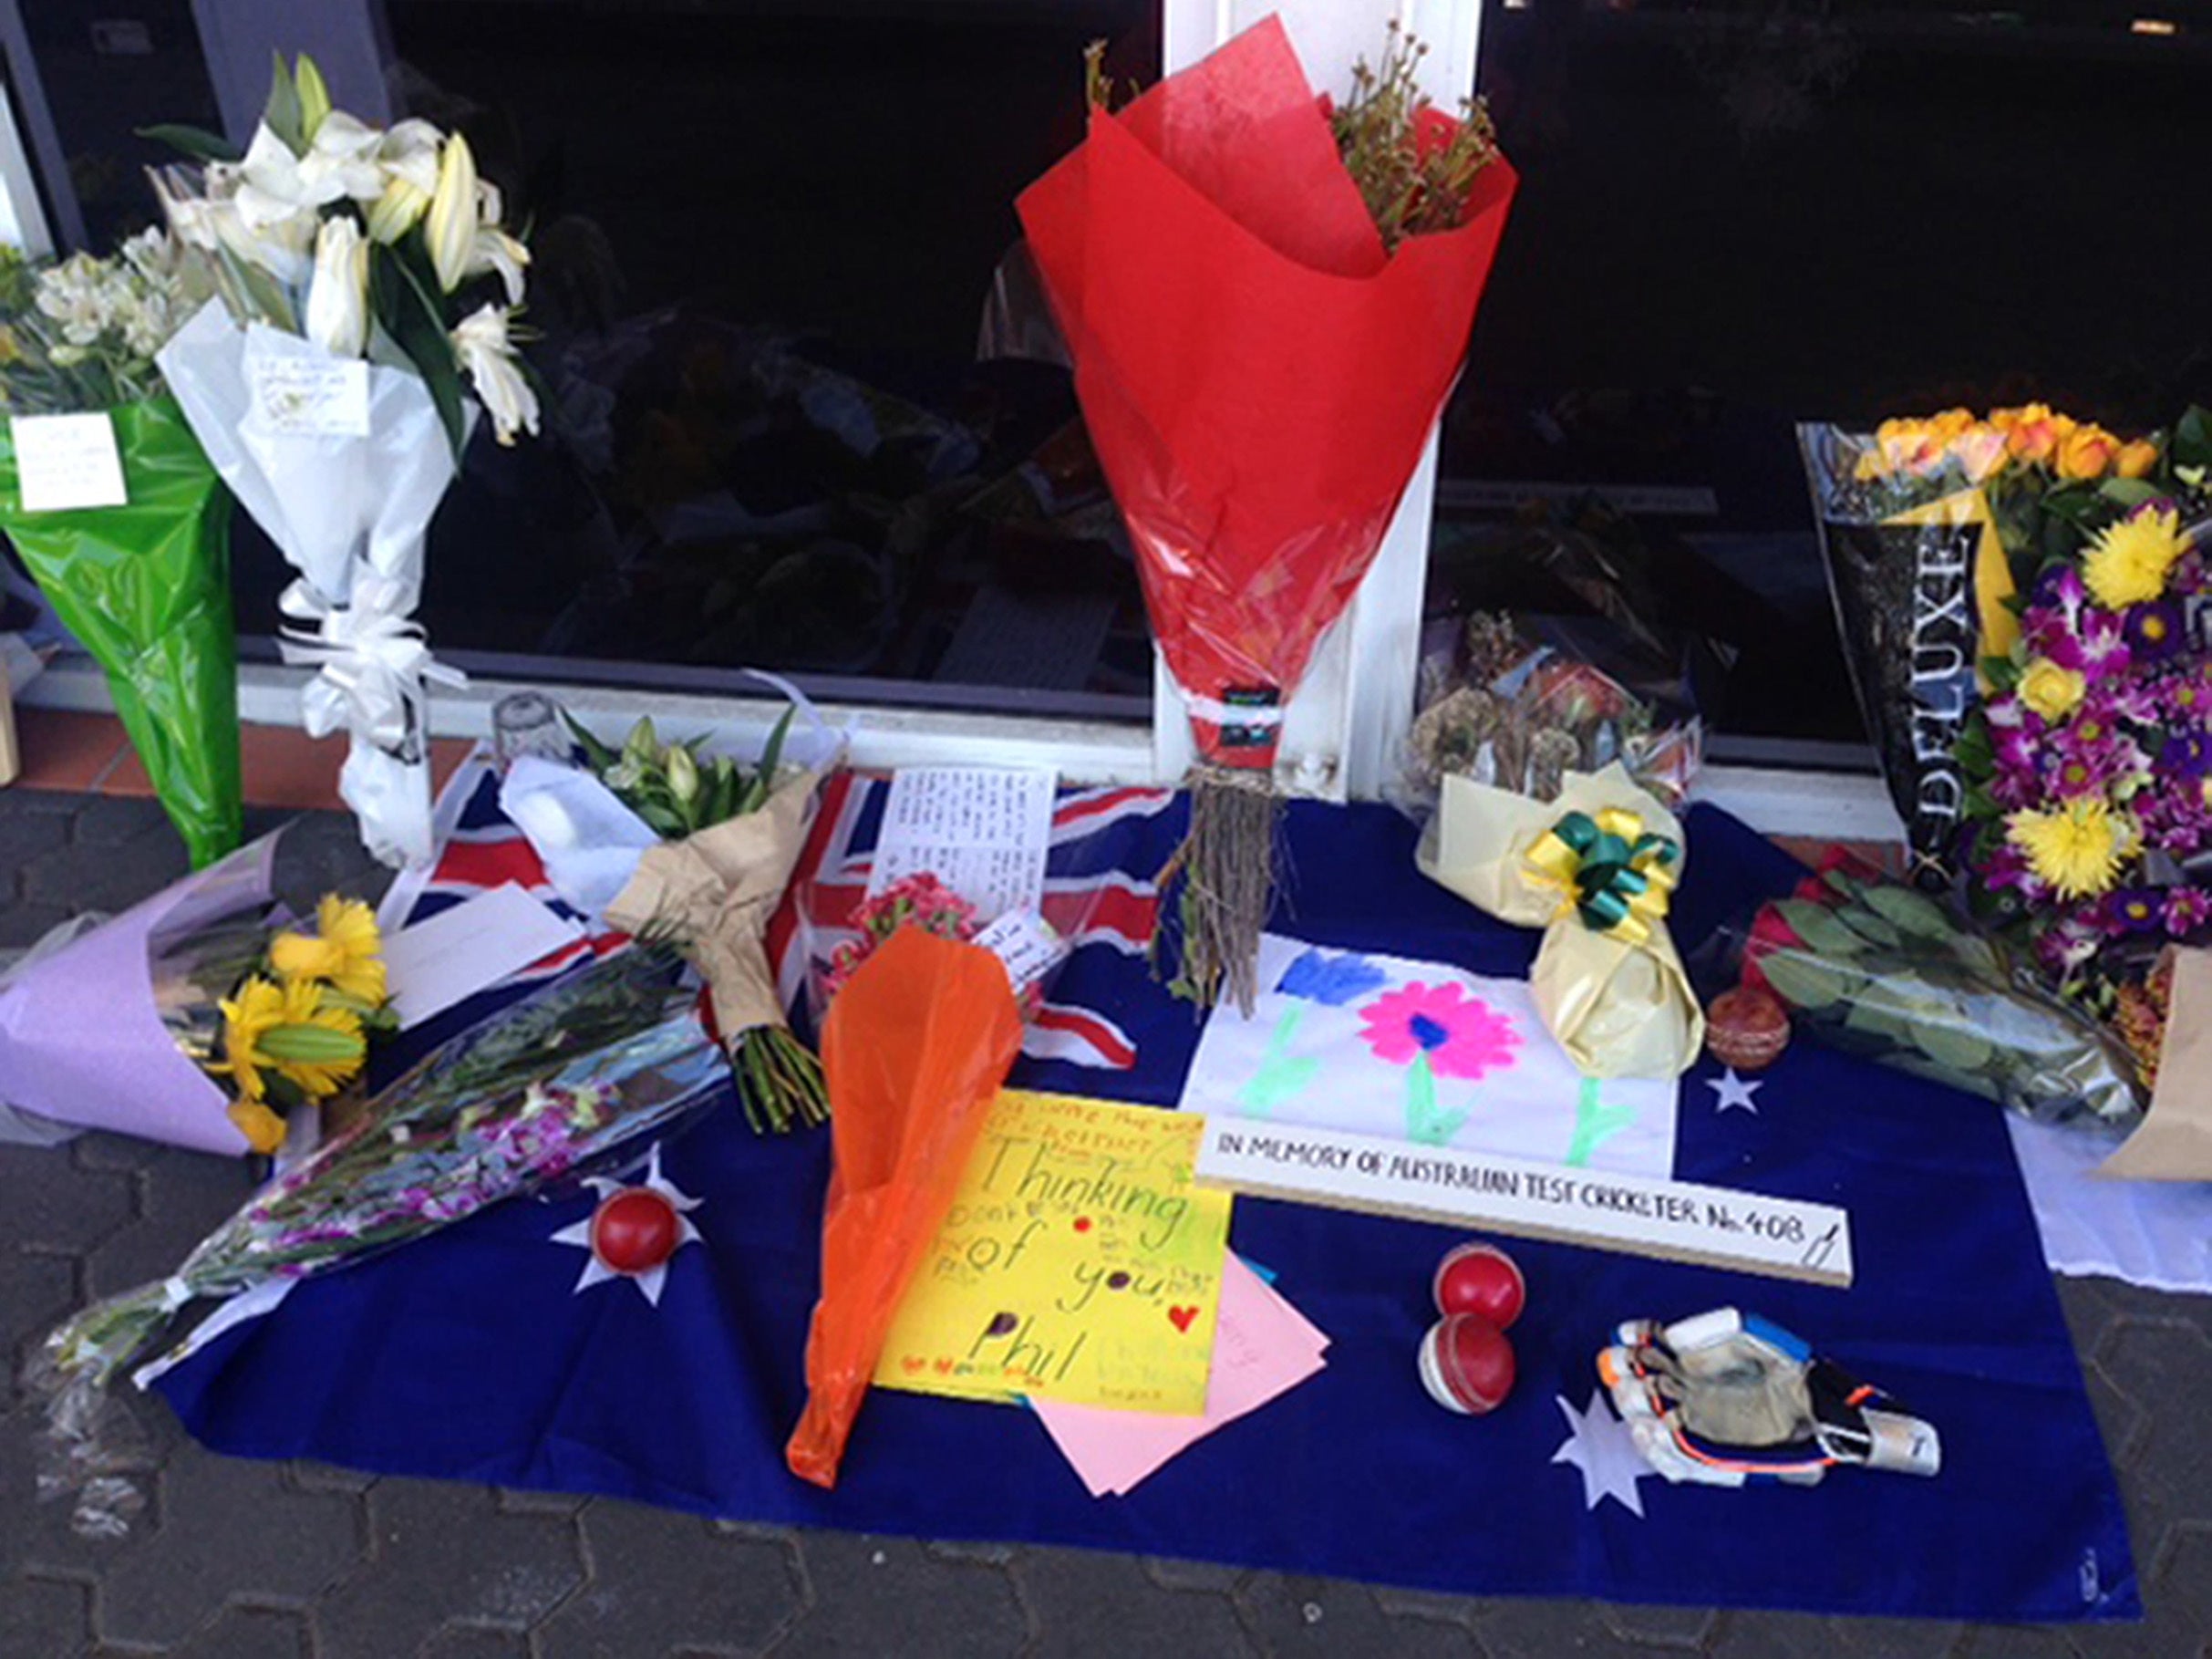 Tributes were left outside Sydney Cricket Ground in memory of Phillip Hughes (Jennifer Cockerall/PA)